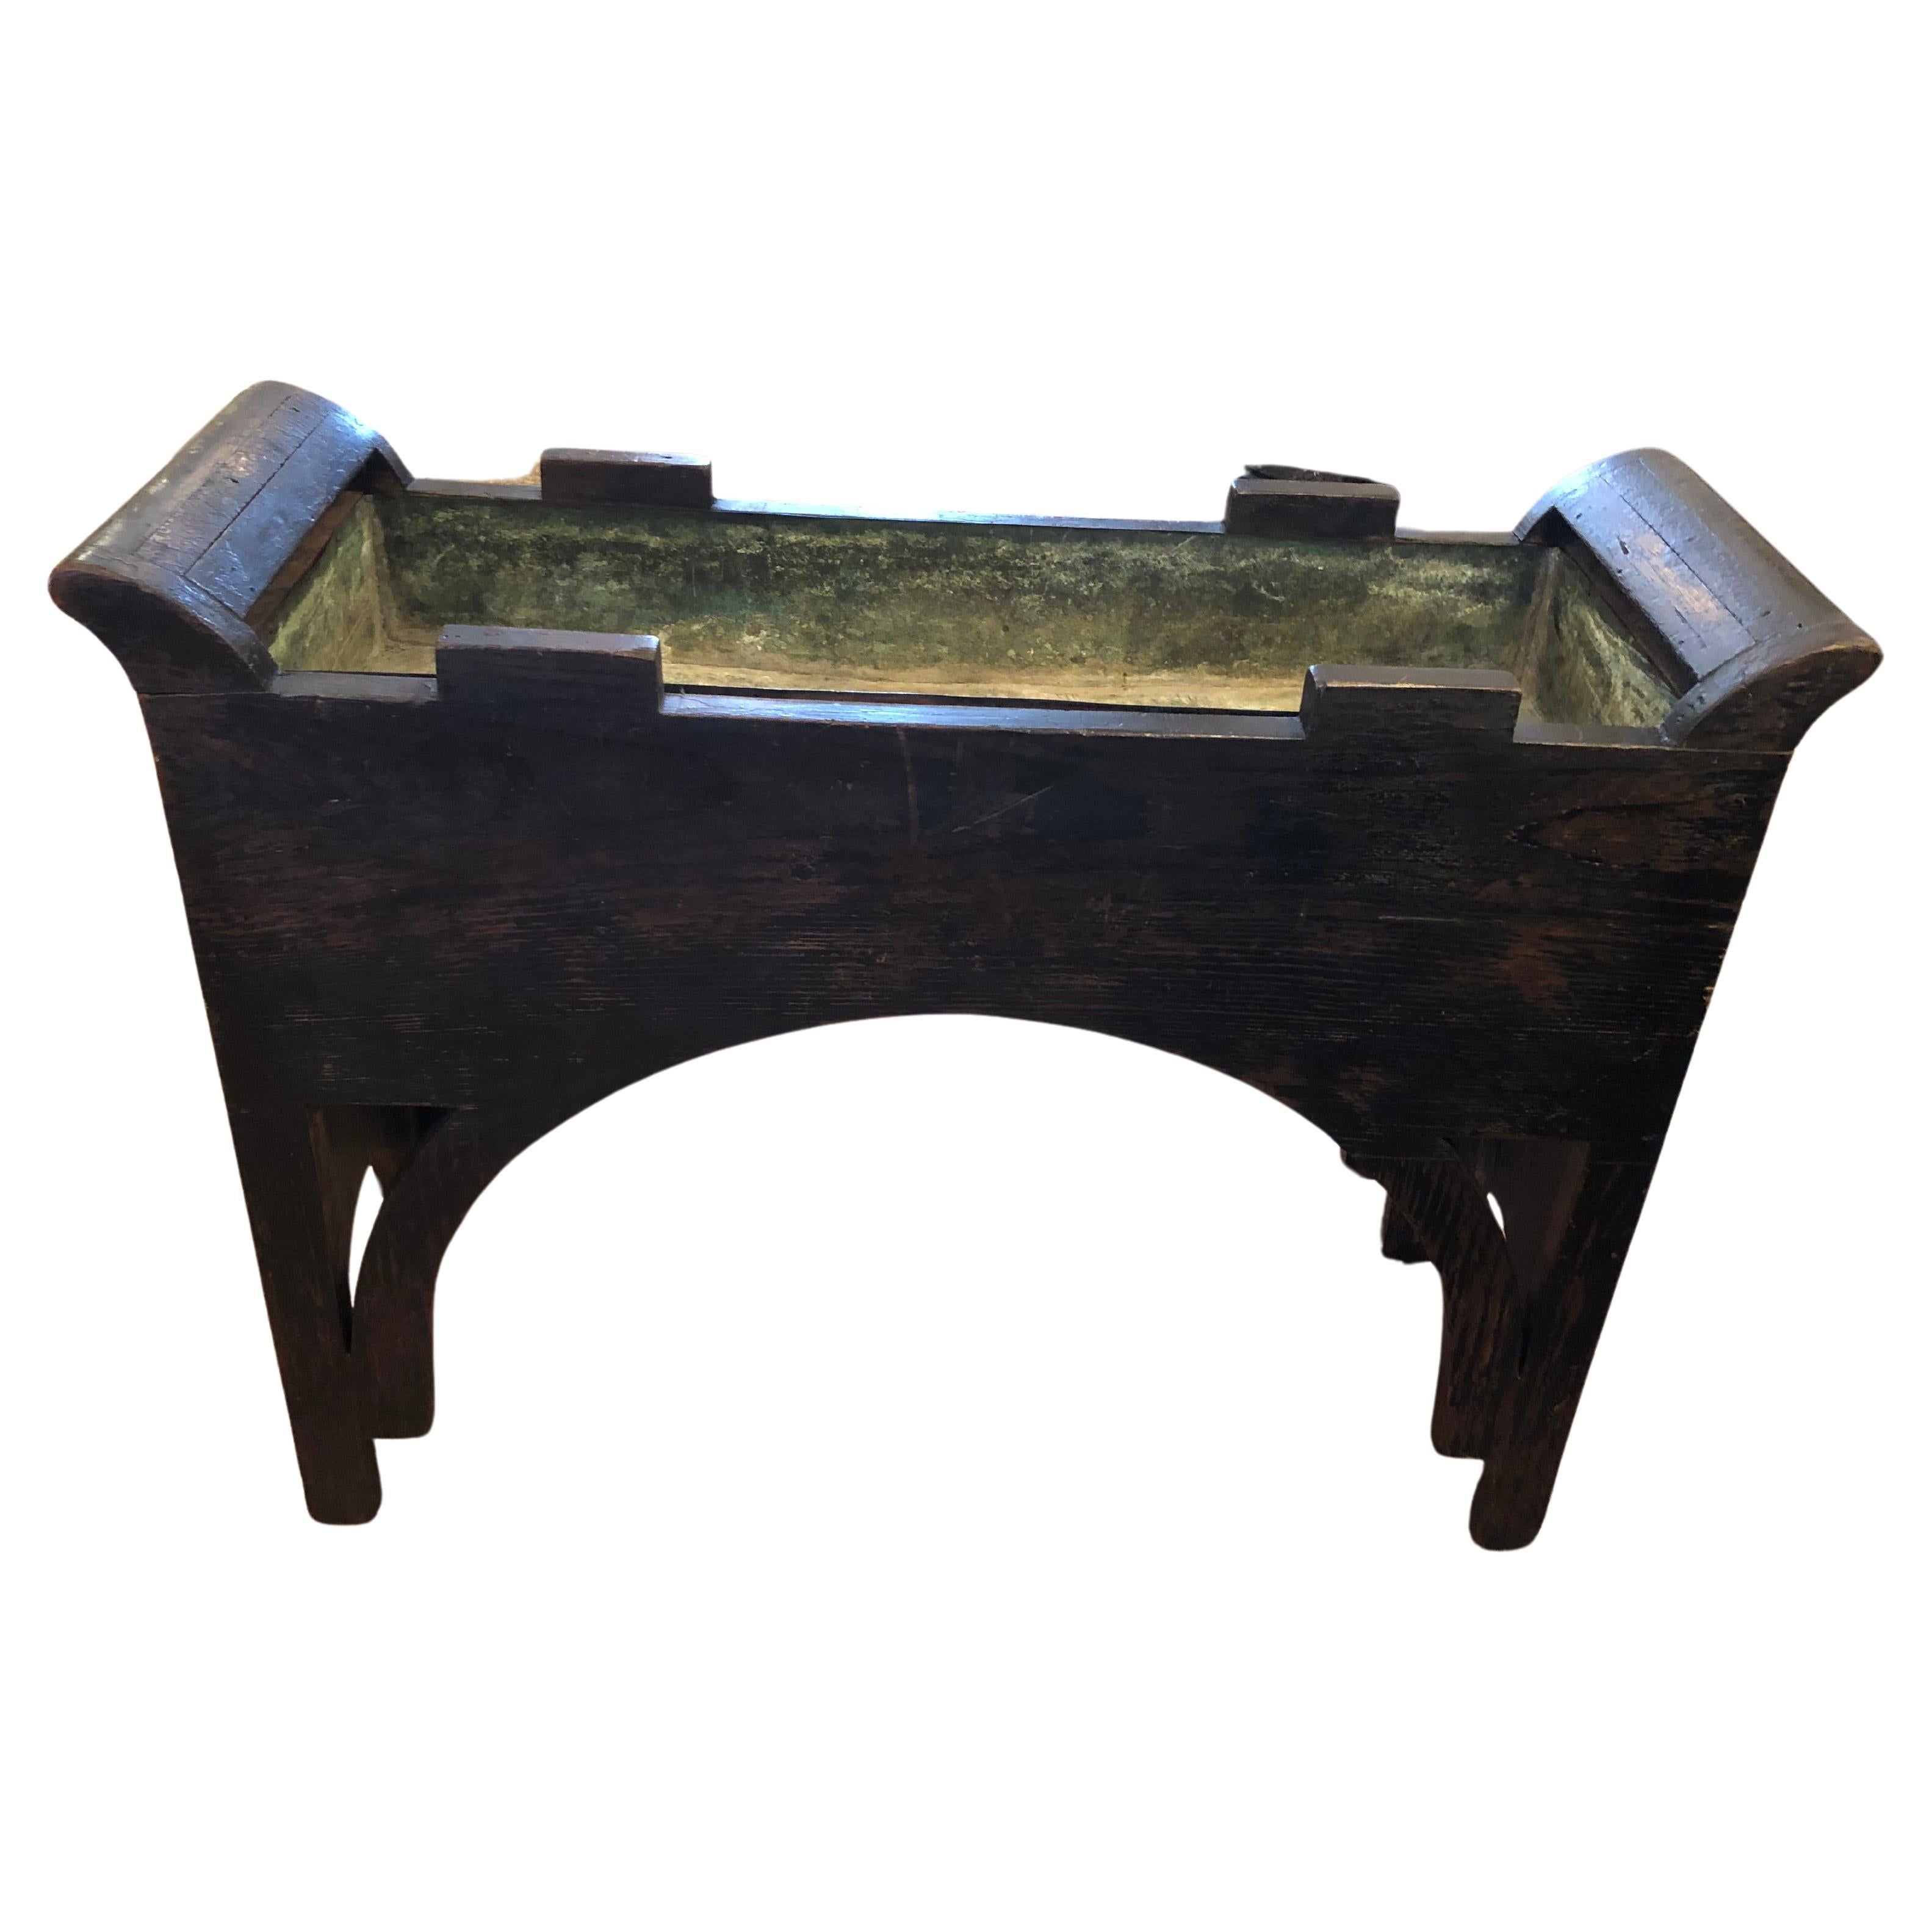 Unusual and character rich chinoiserie ebonized wood rectangular planter having weathered copper liner and wonderful rustic worn patina of figural scenes.
Interior is 4